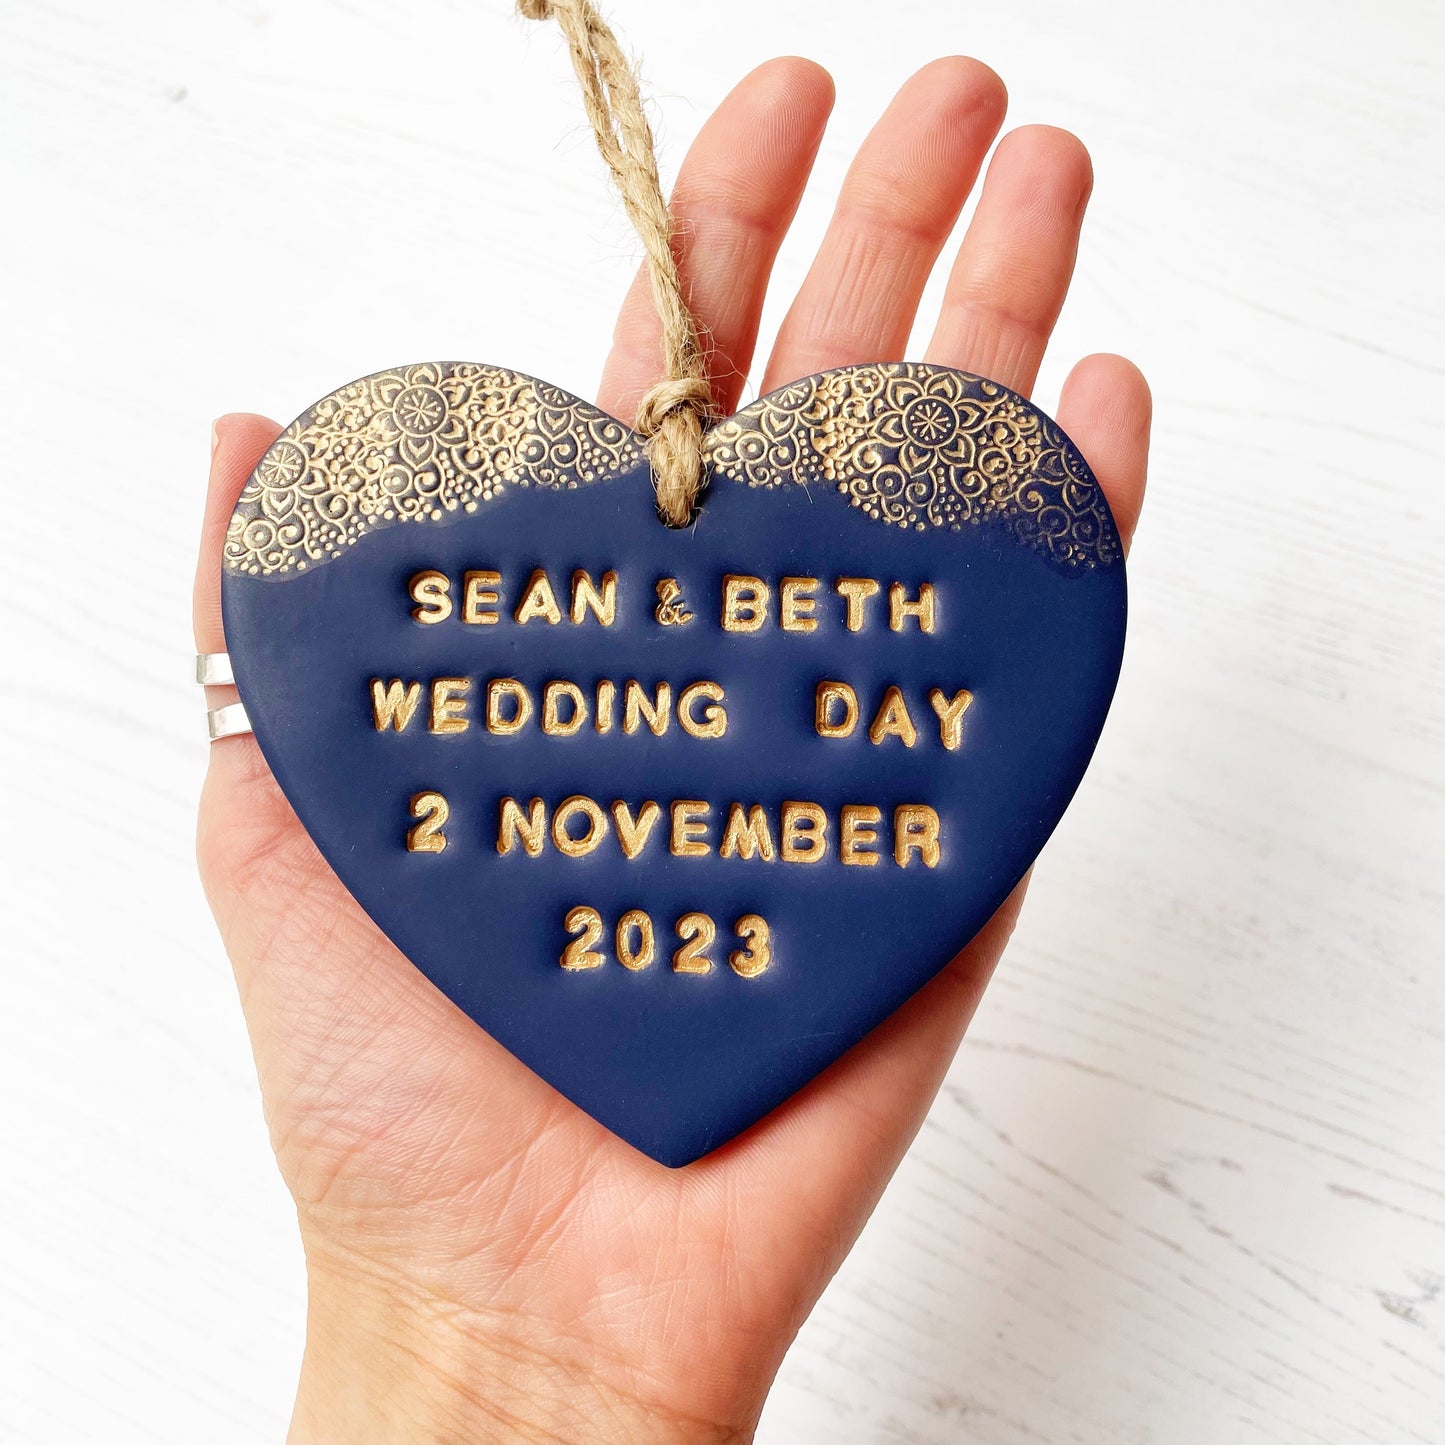 Personalised wedding gift, navy clay heart with a gold lace edge at the top of the heart with twine to hang, the heart is personalised with SEAN & BETH WEDDING DAY 2 NOVEMBER 2023